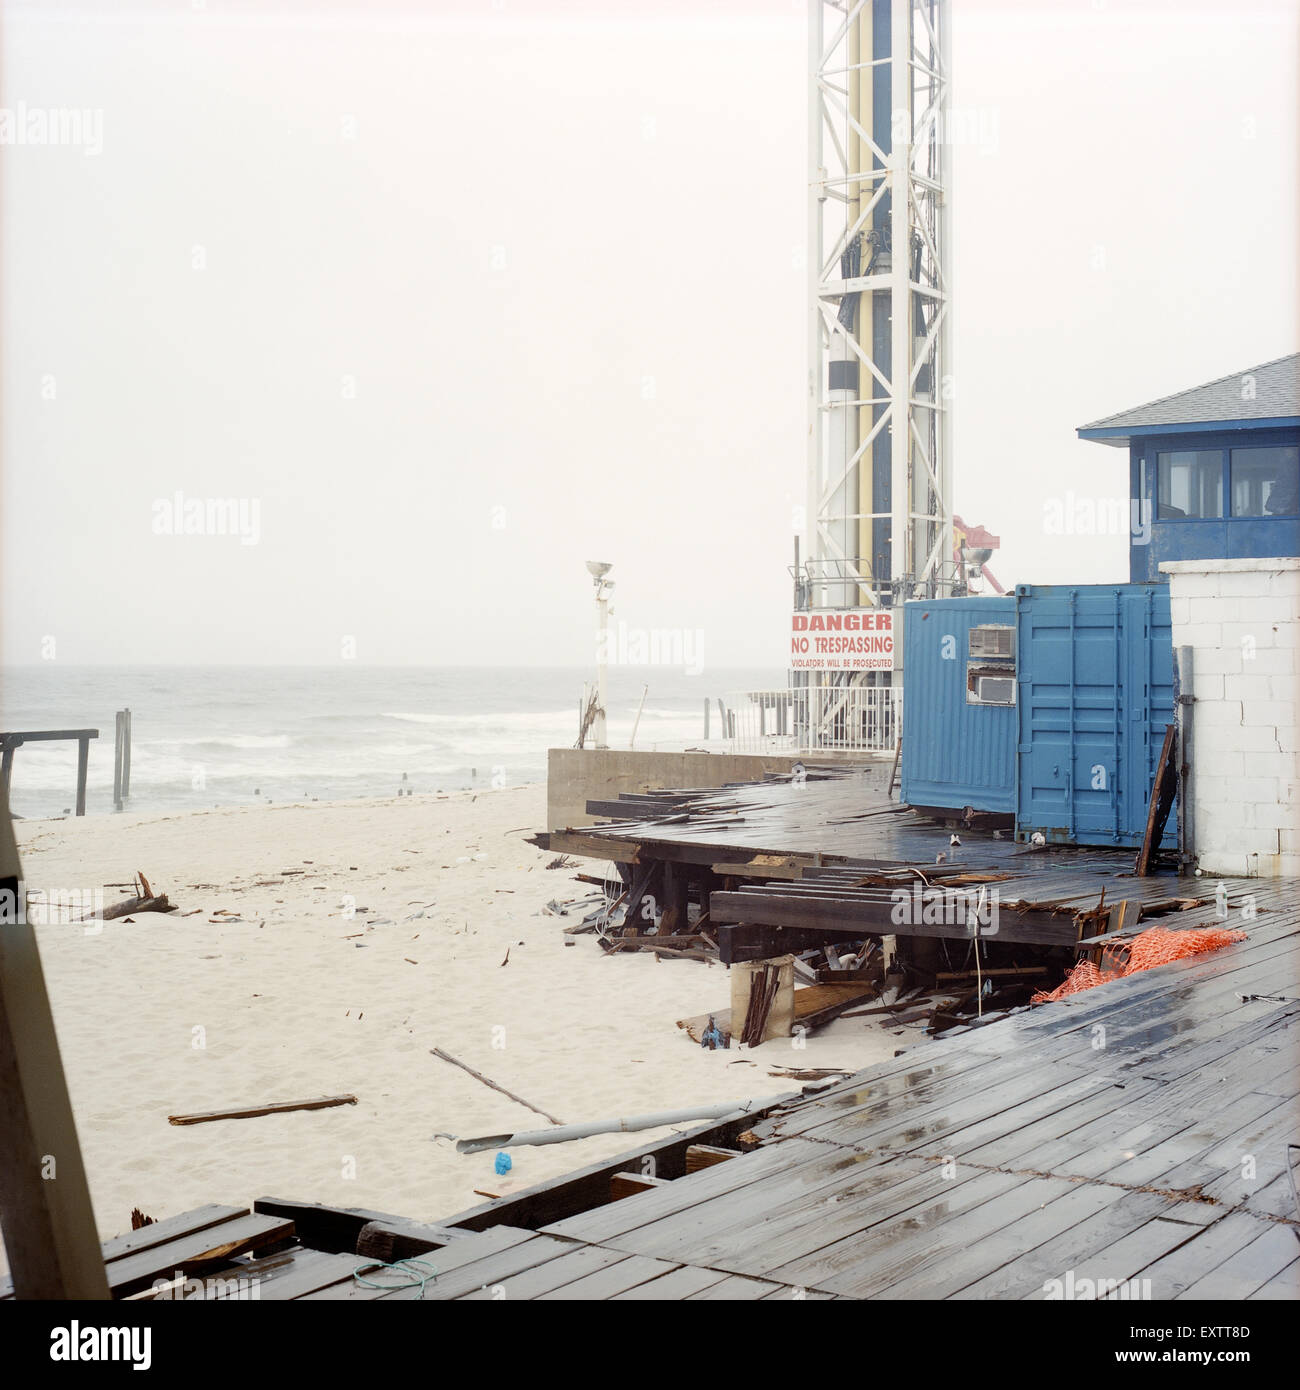 View of wrecked Pier from Hurricane Sandy taken on June 7, 2013 in Seaside Heights New Jersey Stock Photo